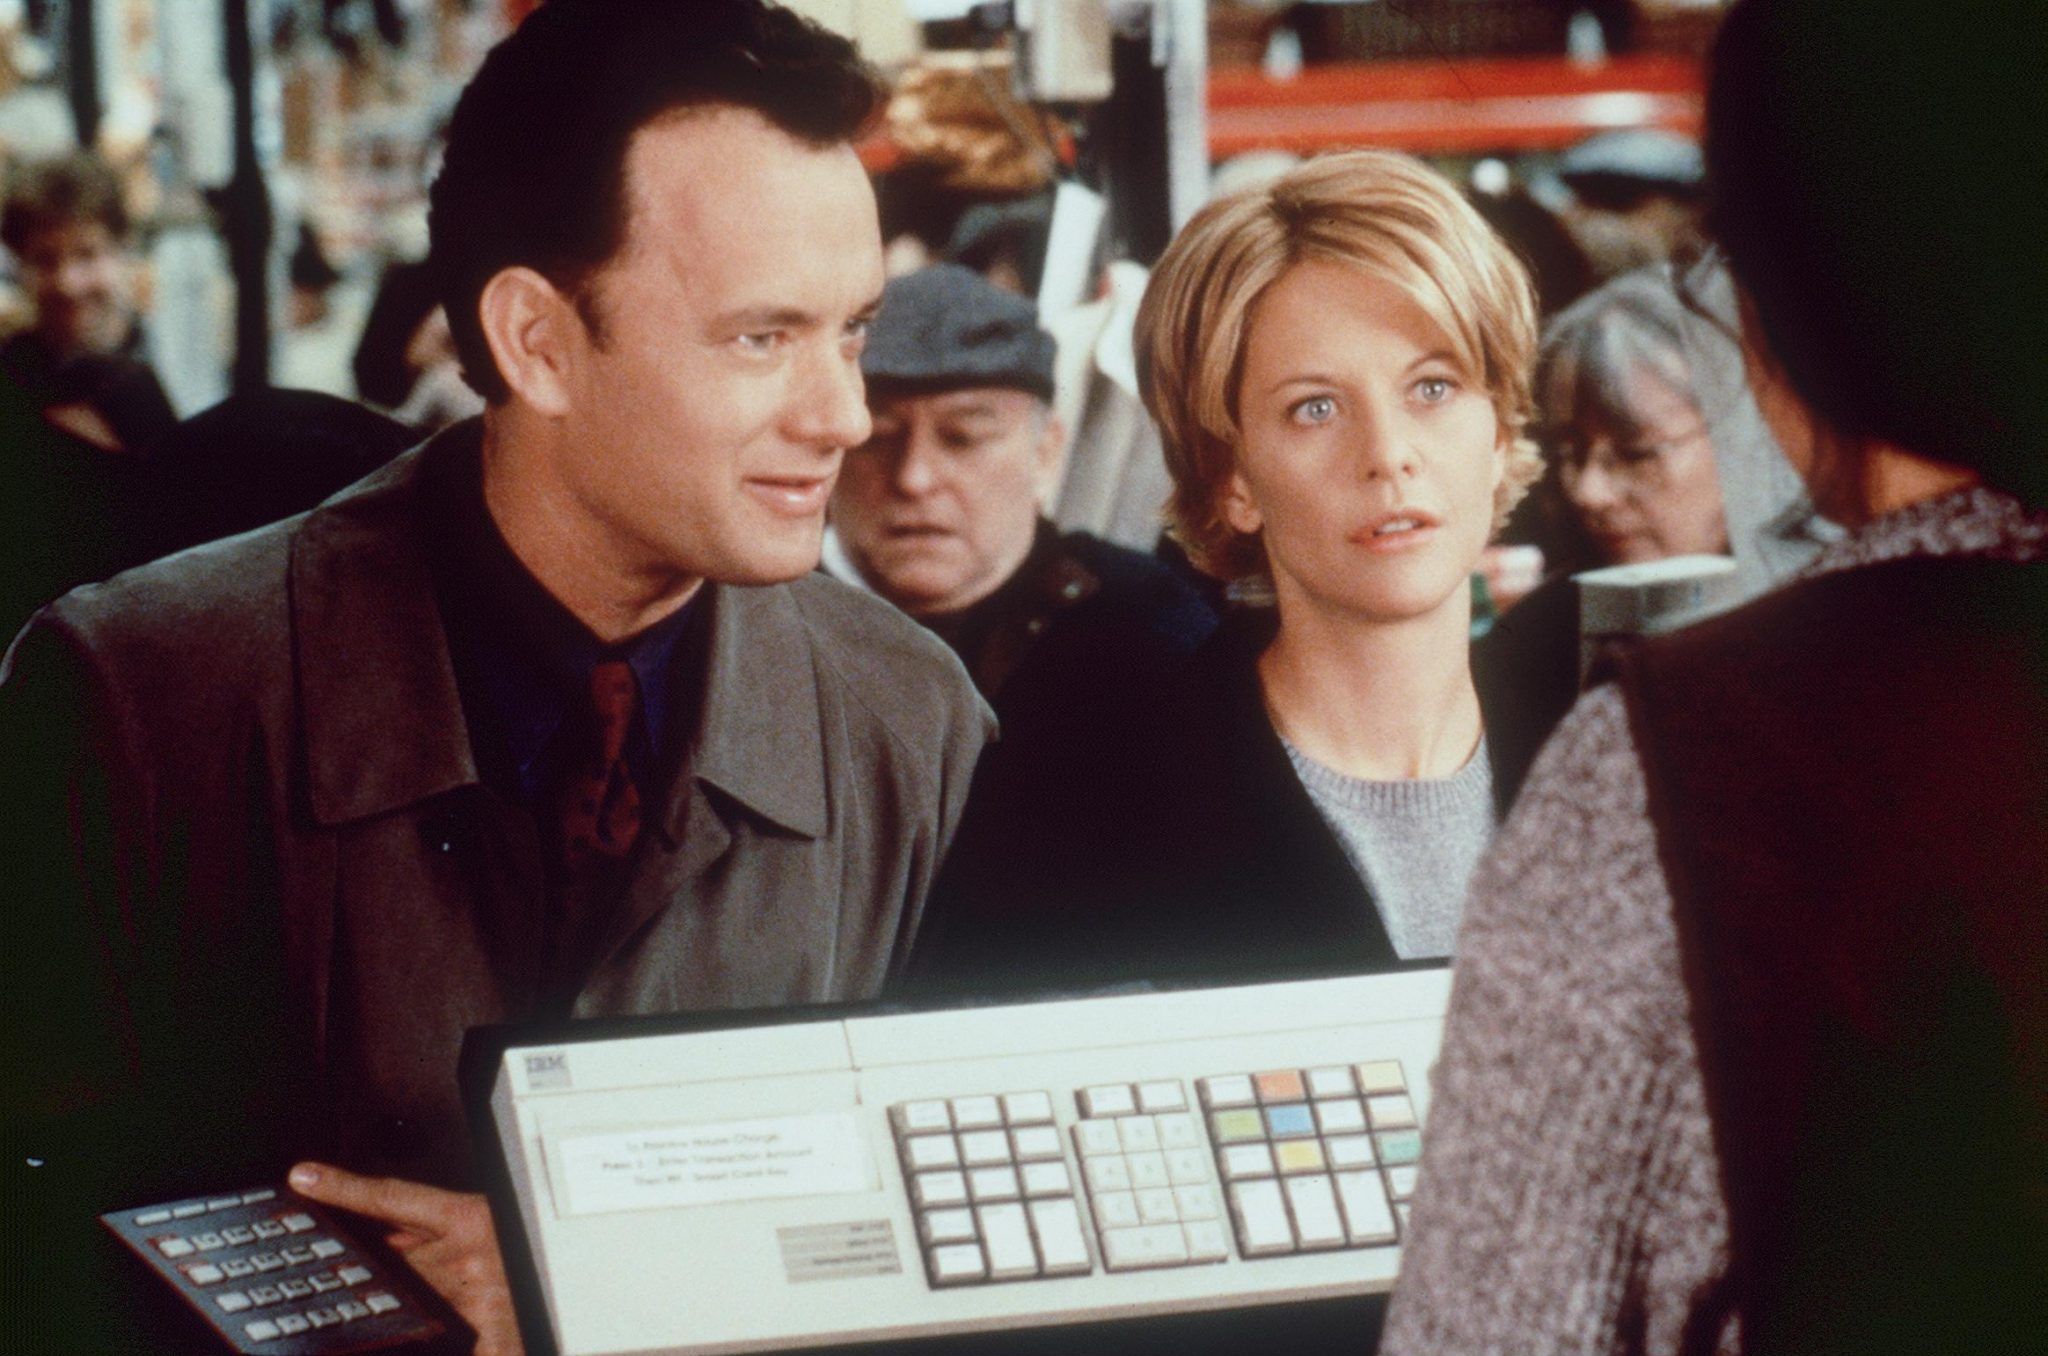 What You've Got Mail Movie Taught Me In My 20s